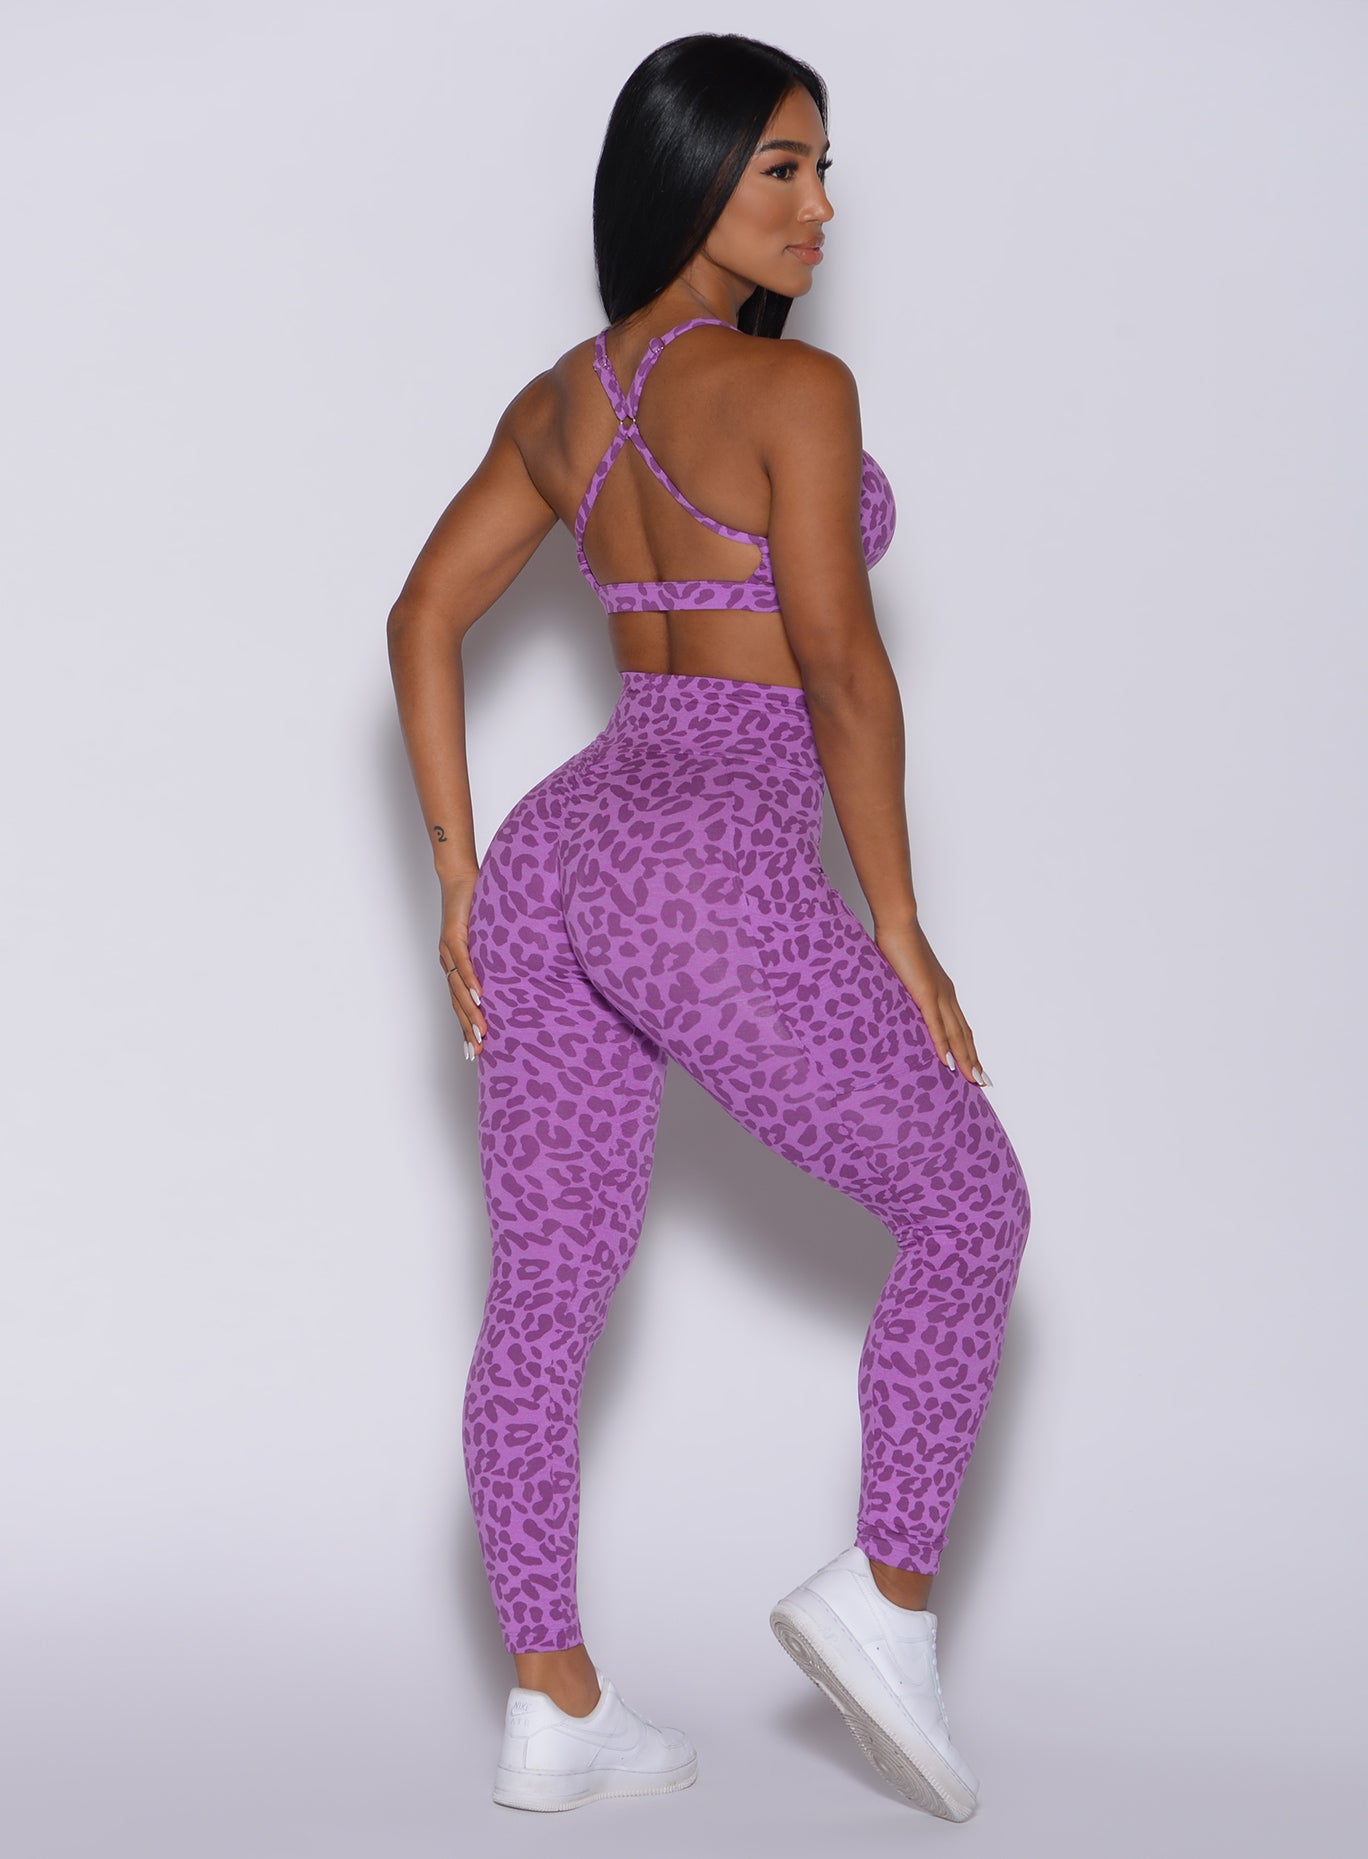 Back profile view of a model in our curves leggings in purple cheetah color and a matching sports bra